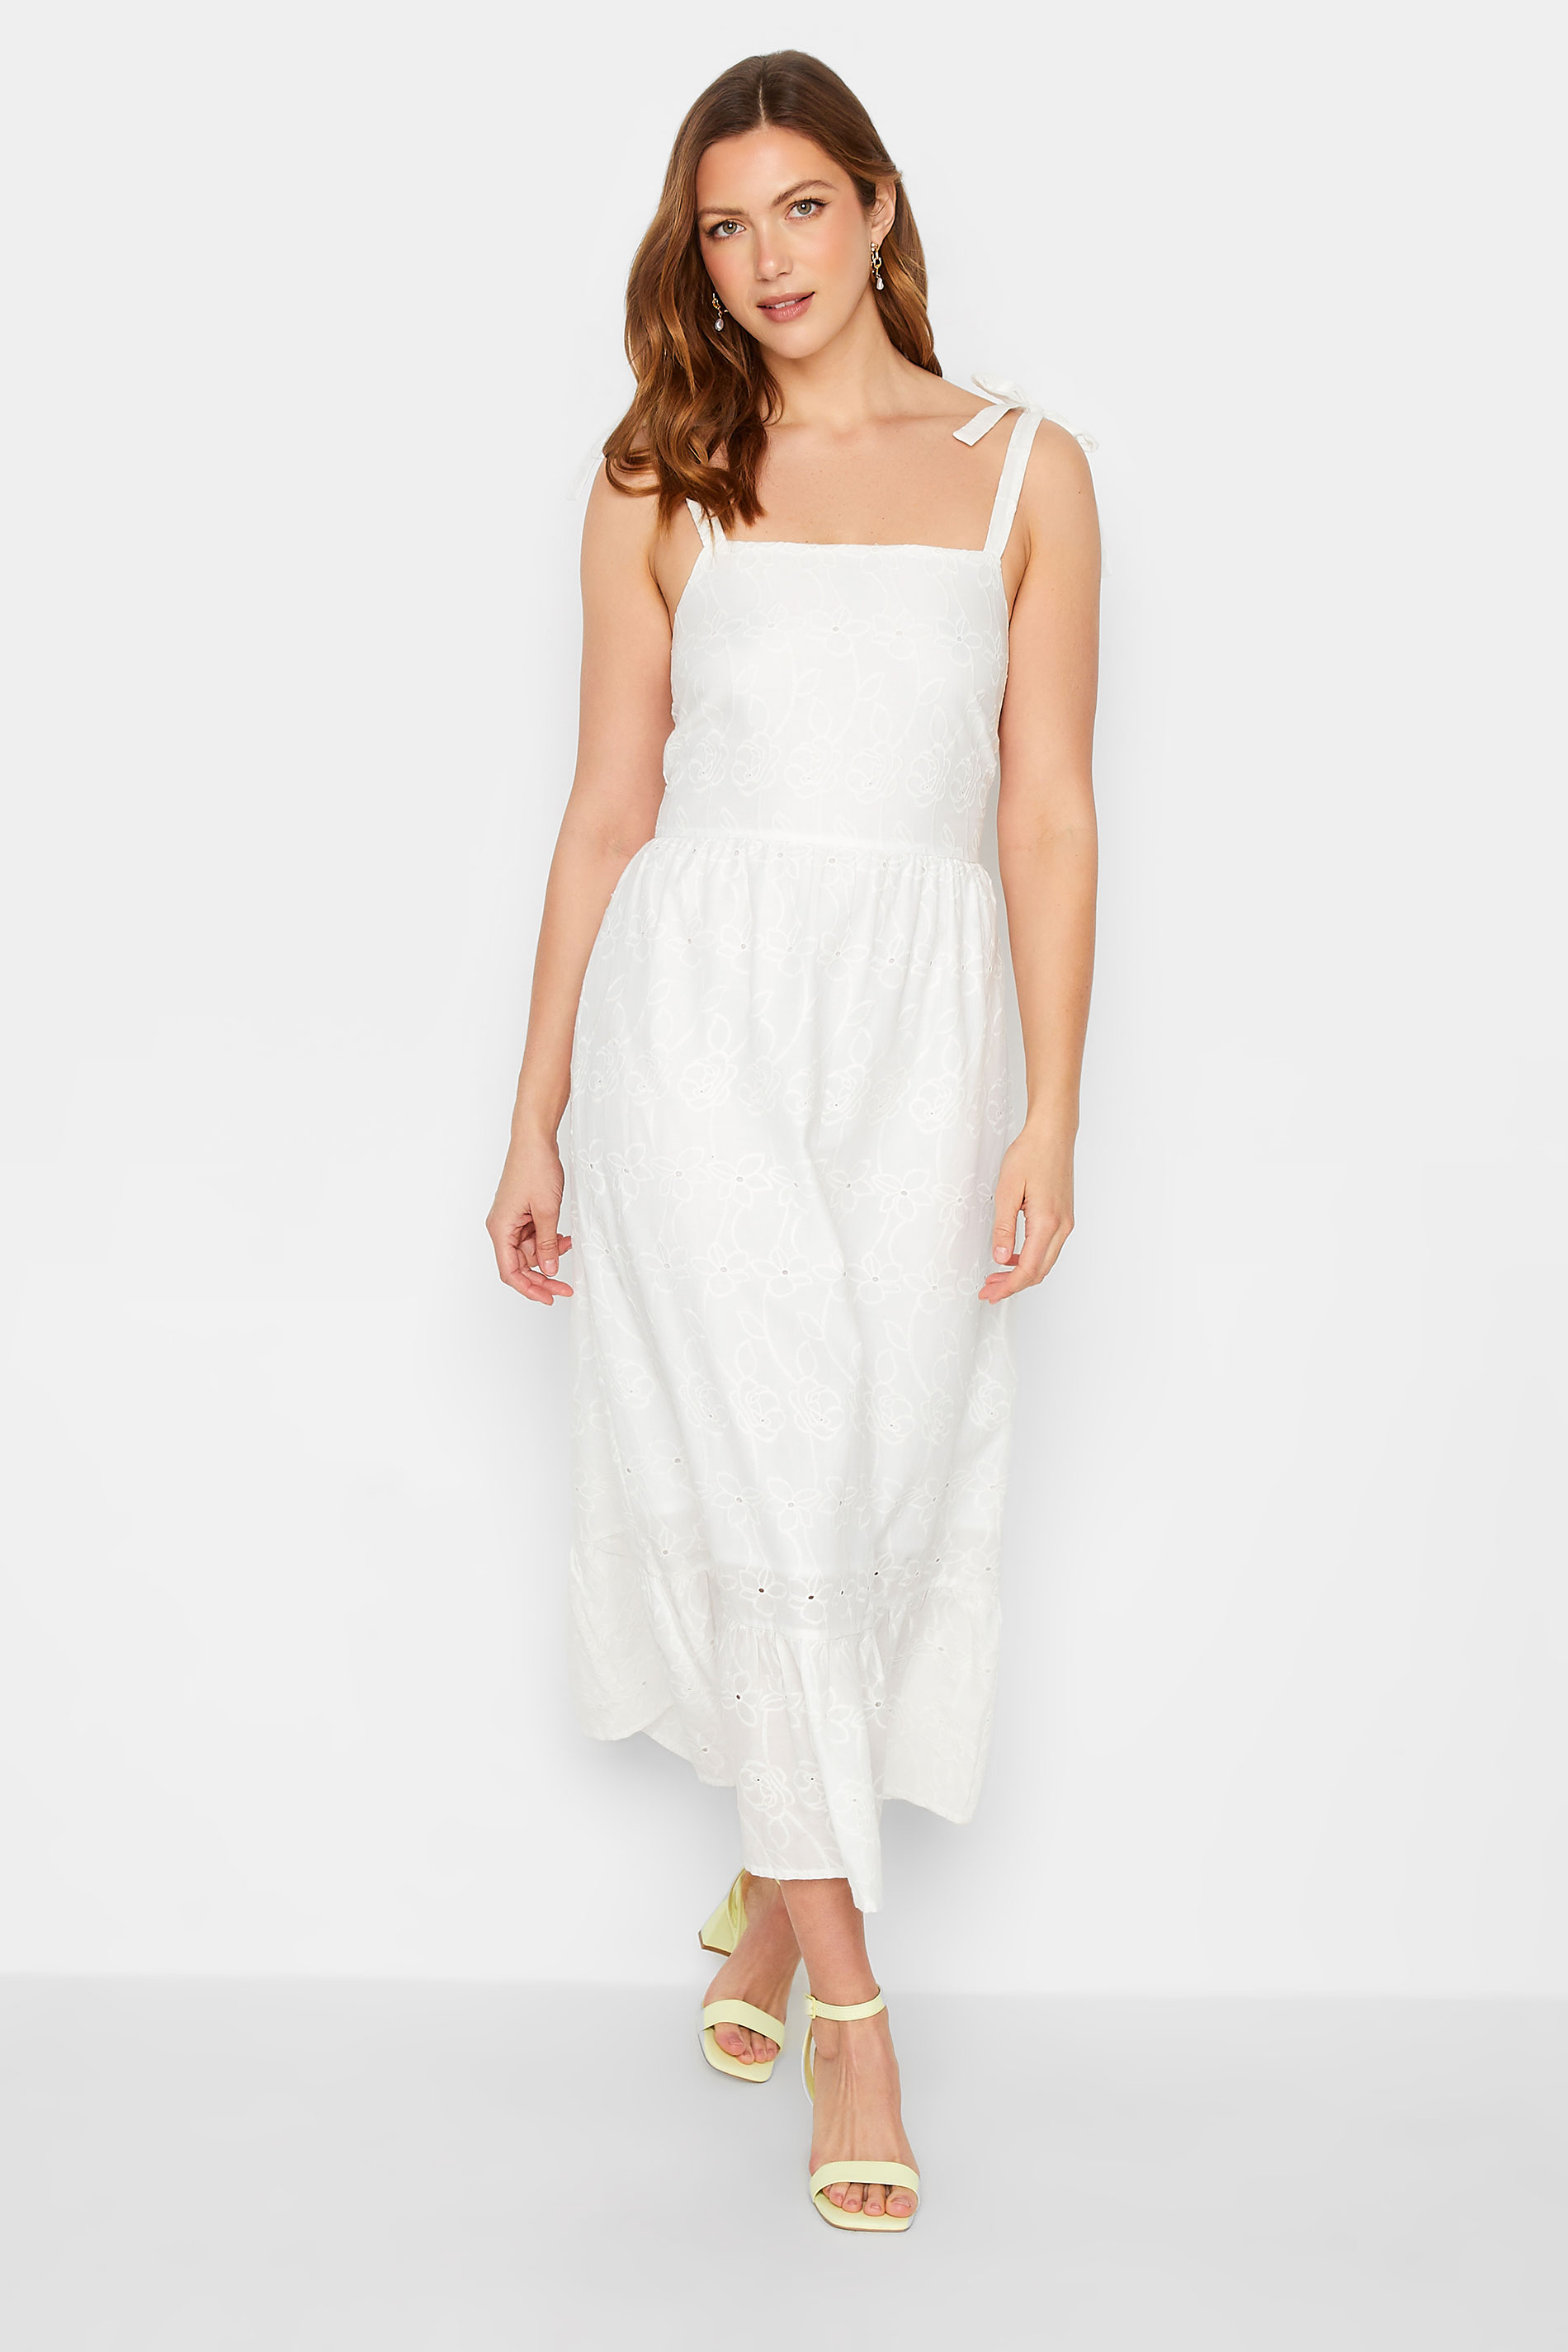 LTS Tall White Floral Broderie Anglaise Cotton Sundress | Long Tall Sally 1